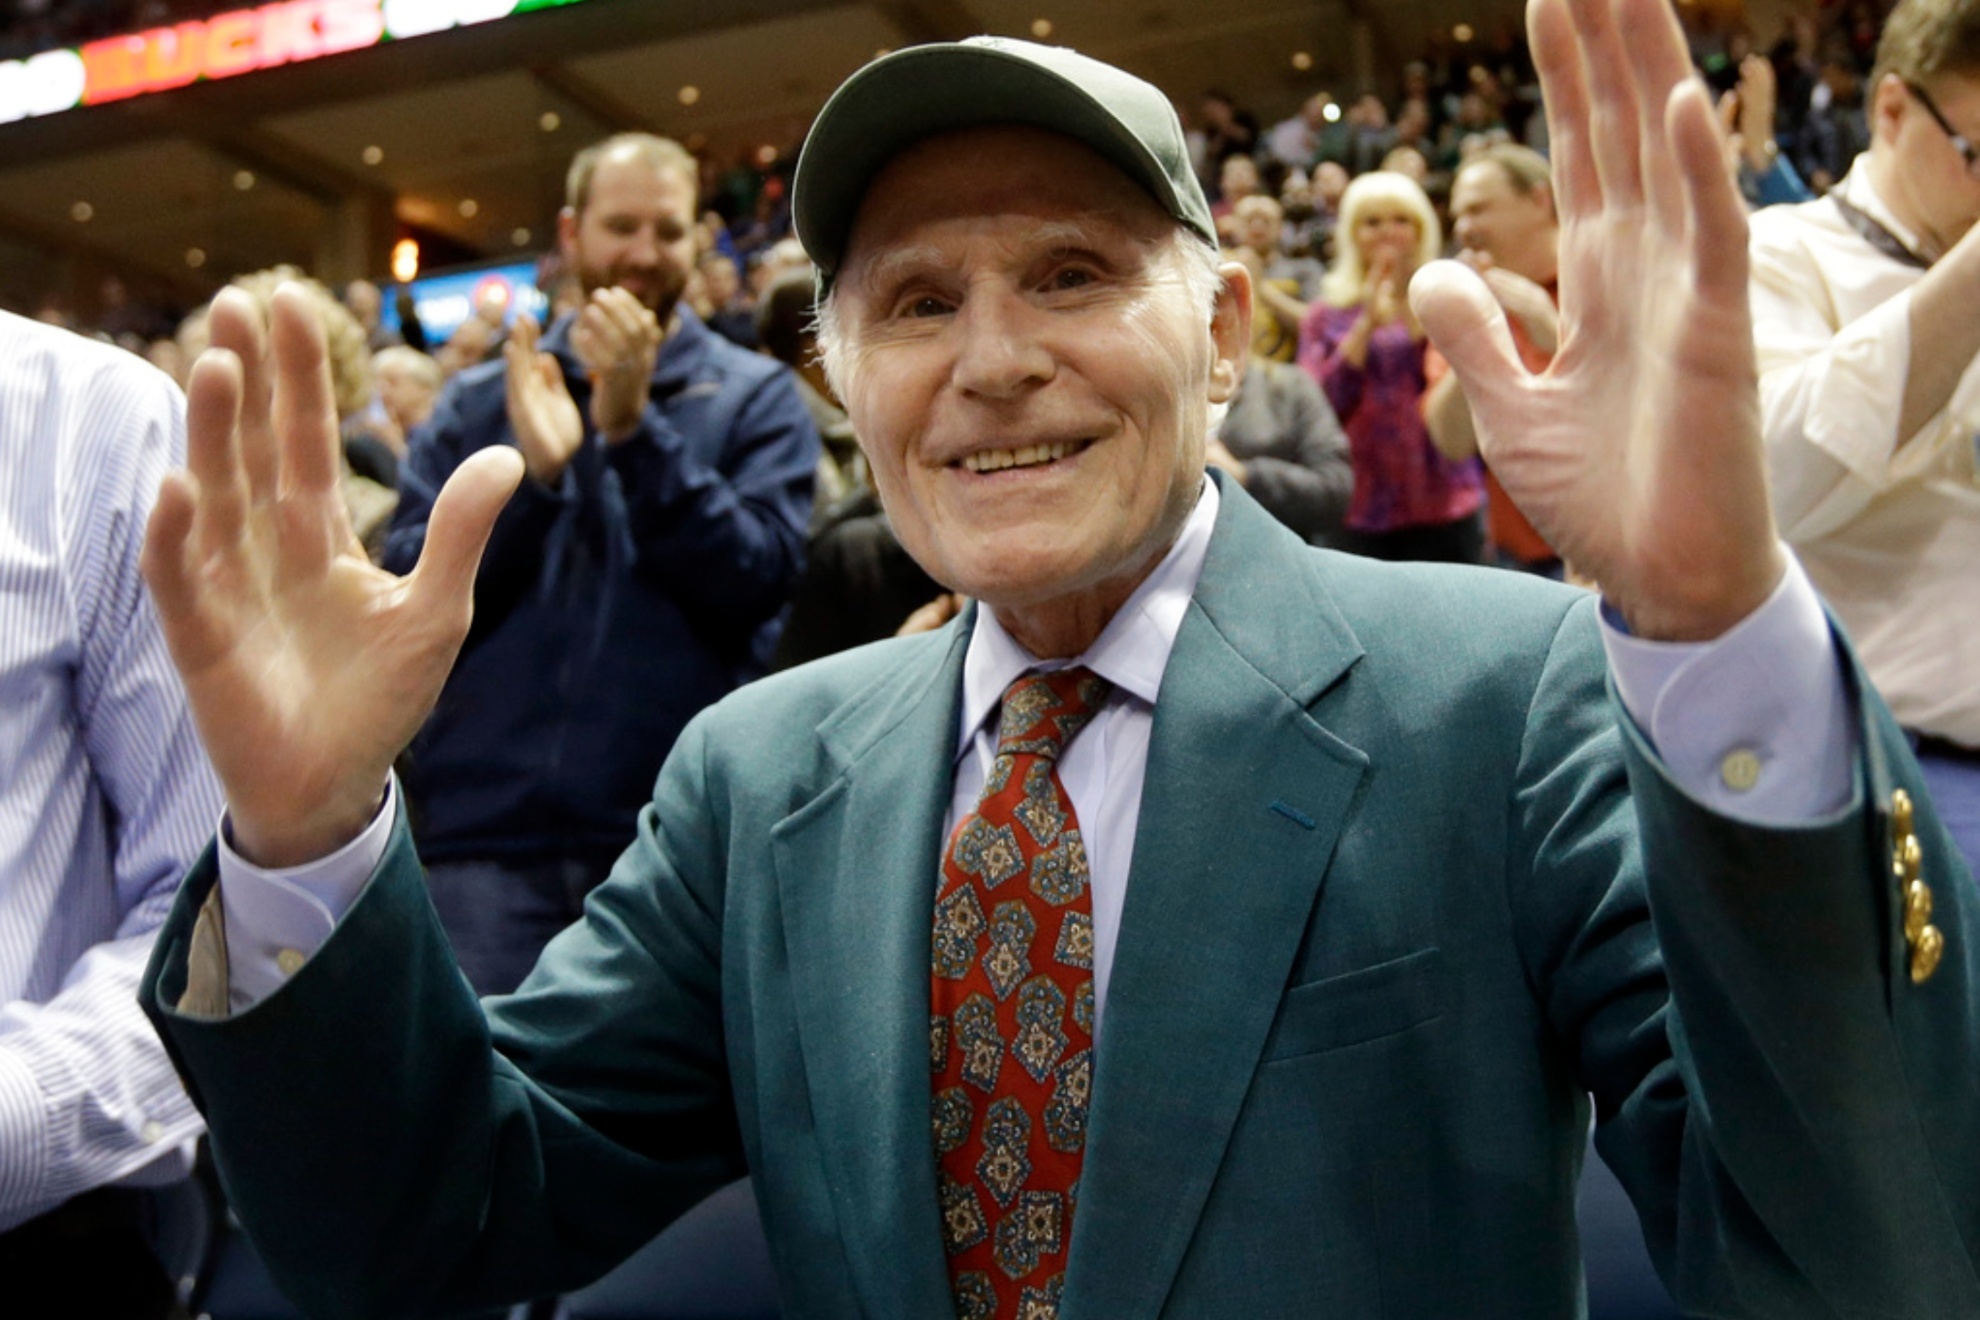 Herb Kohl died on Wednesday at the age of 88